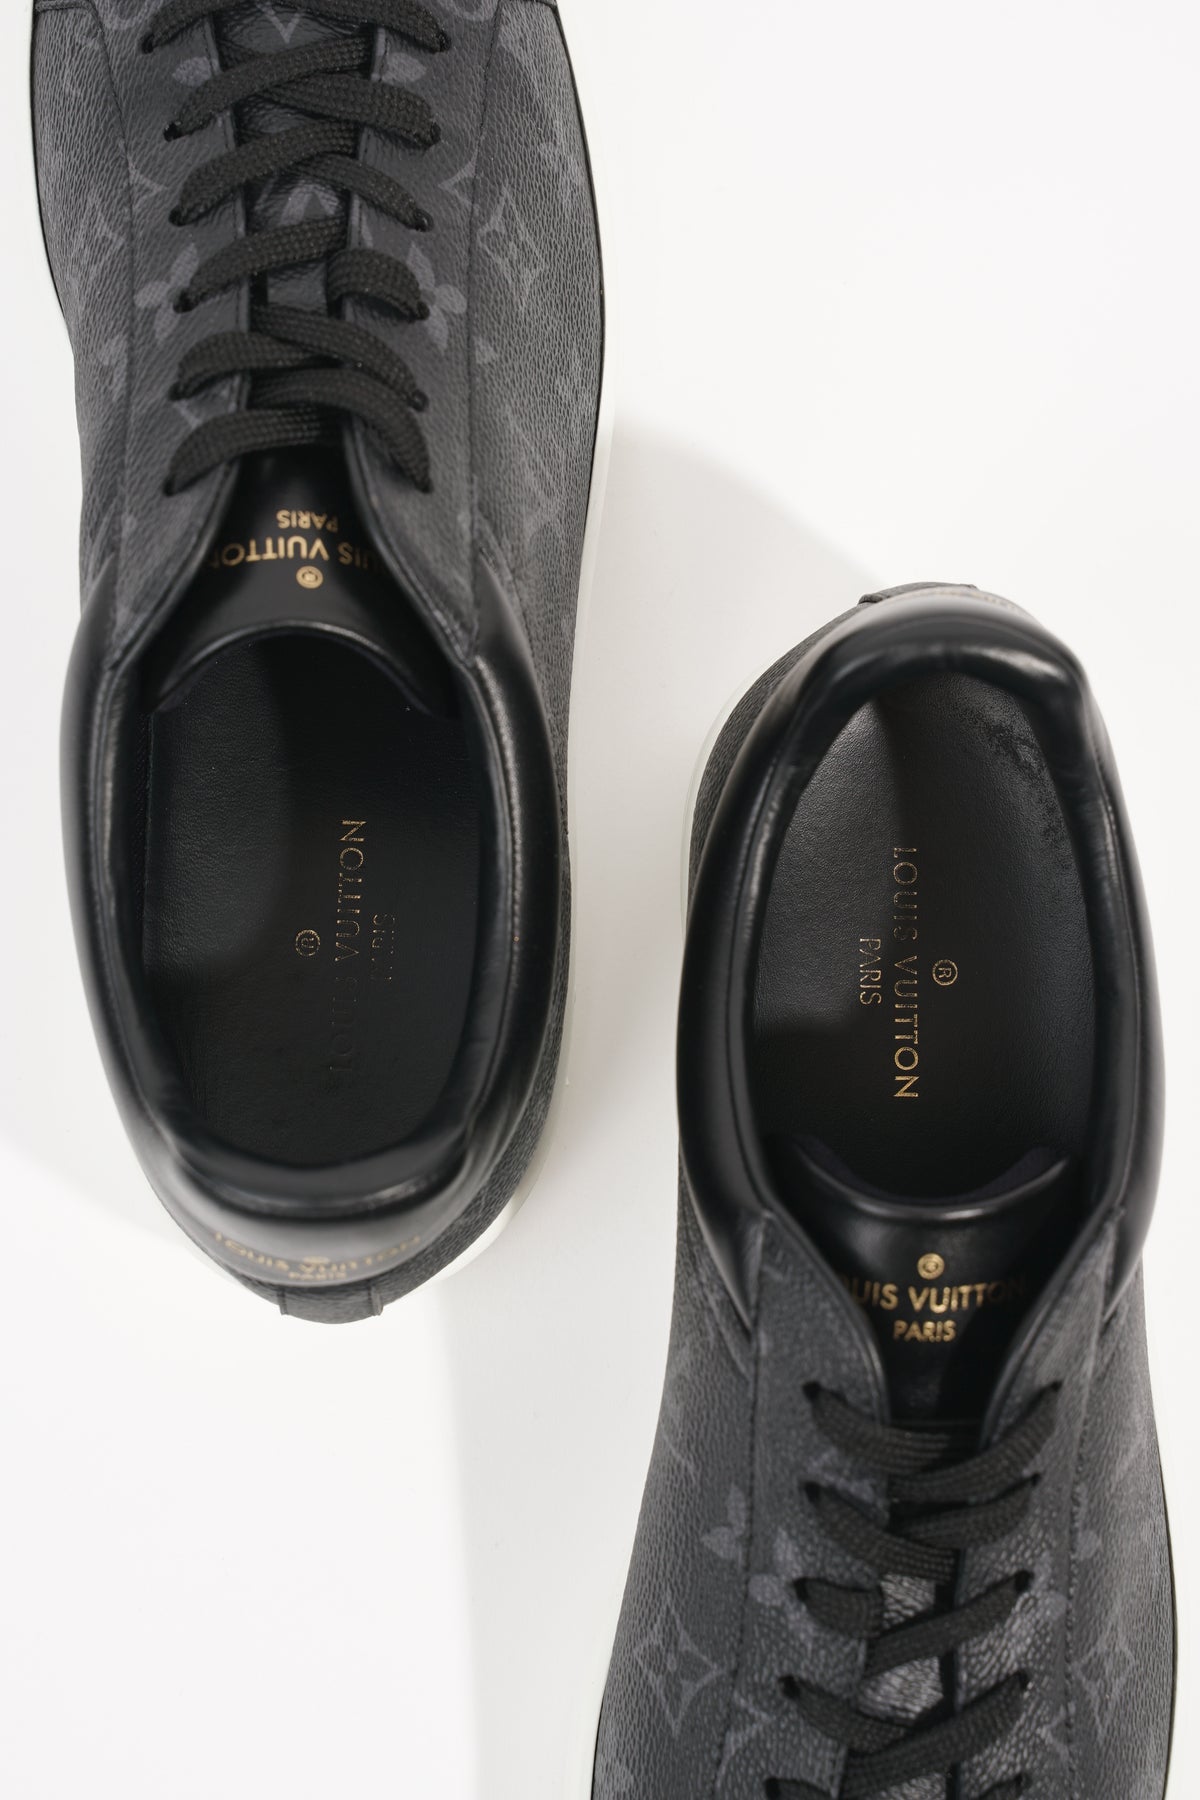 Louis Vuitton Men's Black Embossed Leather Luxembourg Sneakers